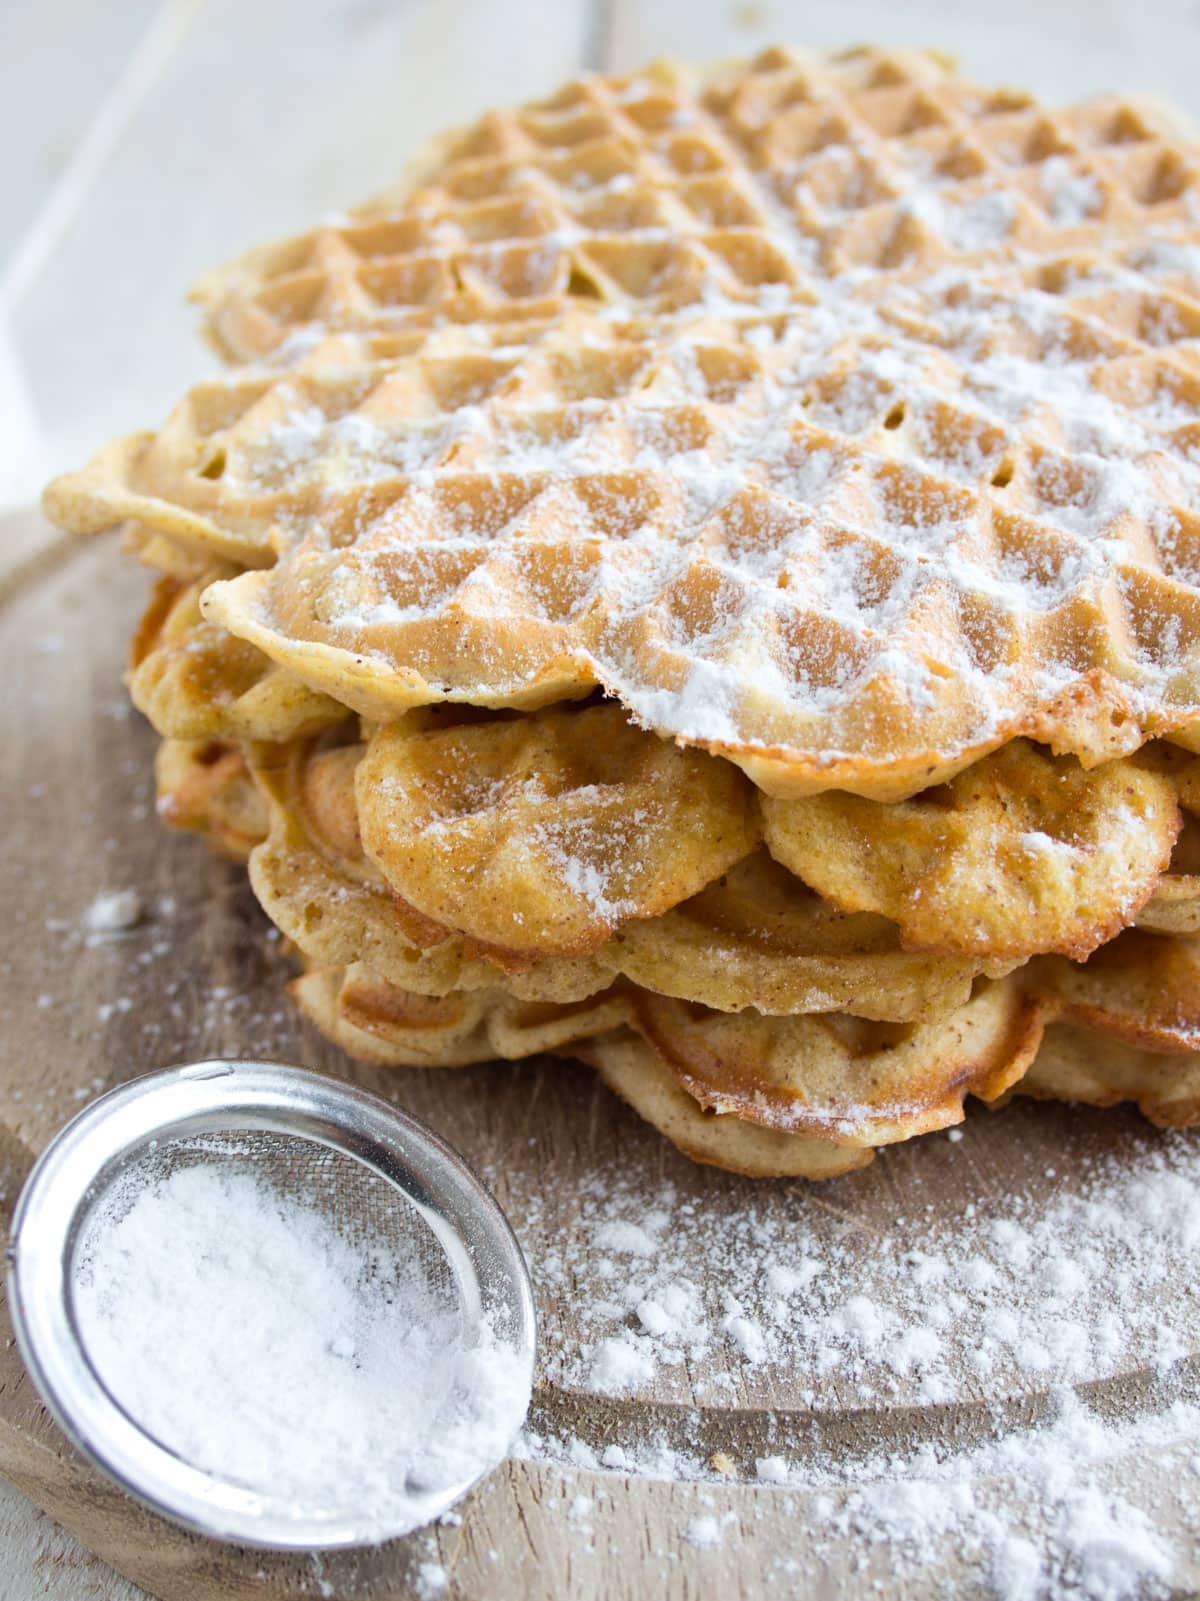 A stack of waffles dusted with powdered sweetener.